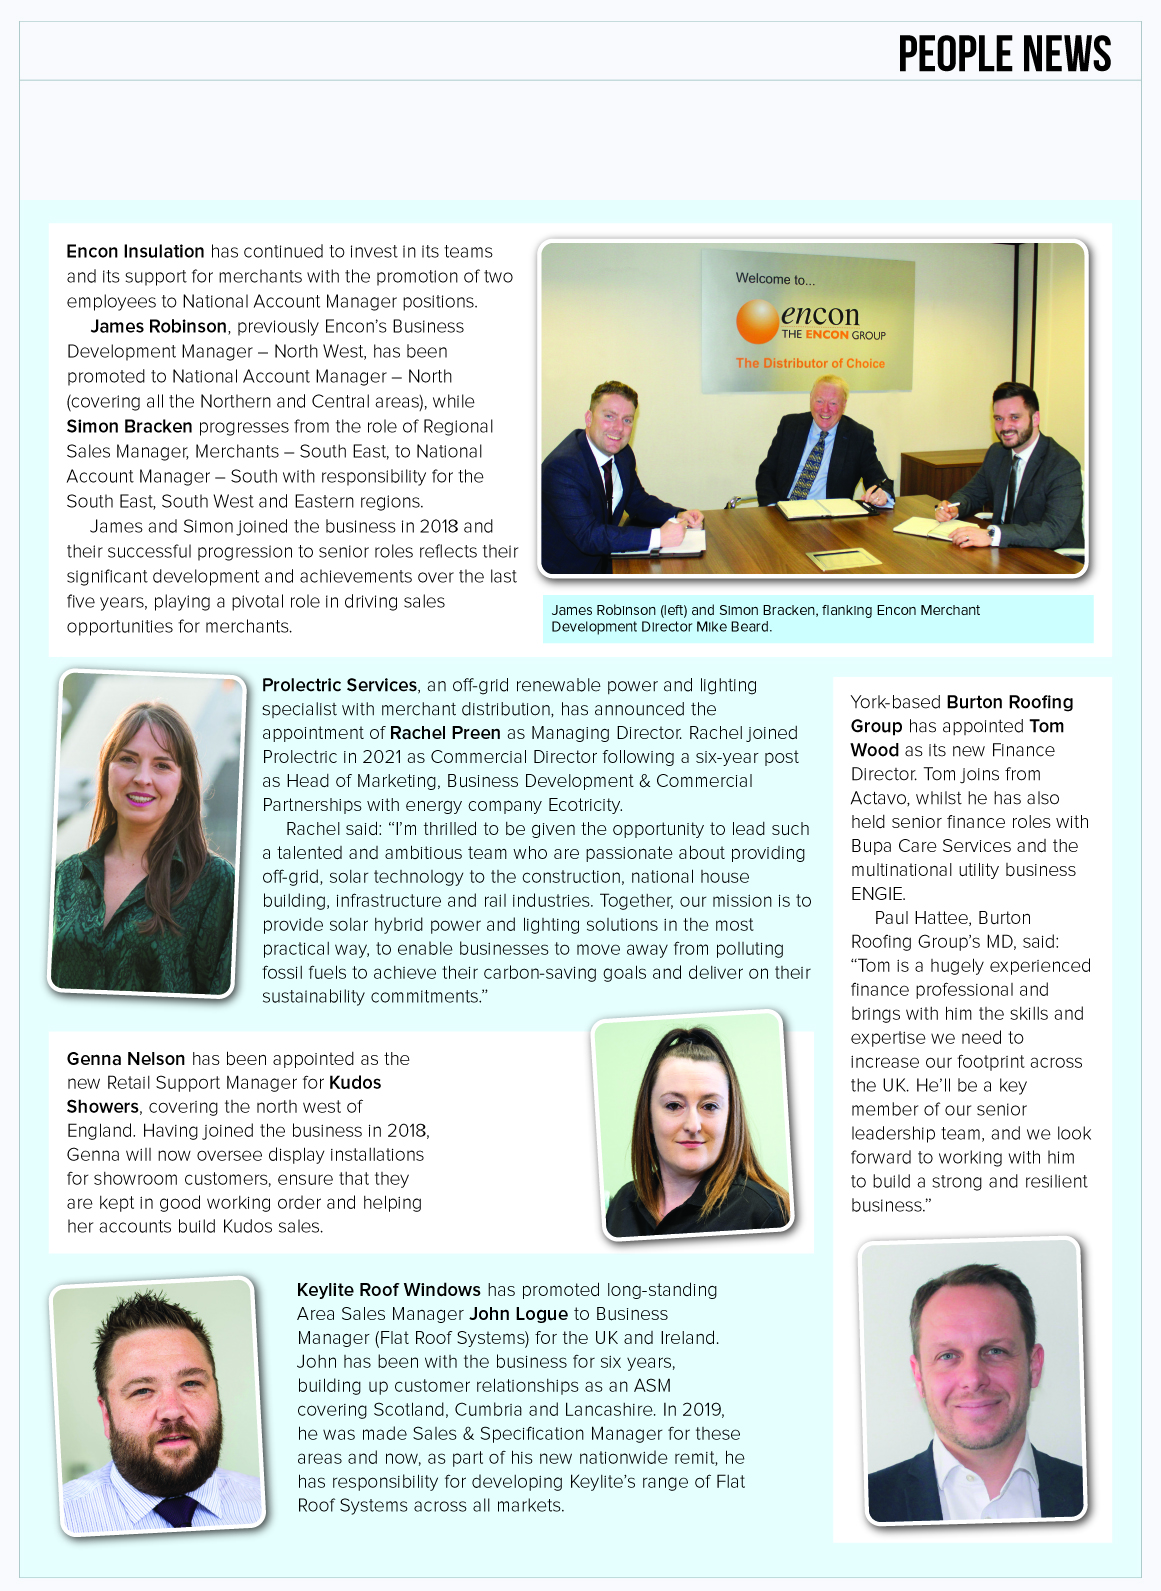 As featured in the February edition of the magazine, PBM presents a selection of some of the latest merchant and supplier appointments and job moves: